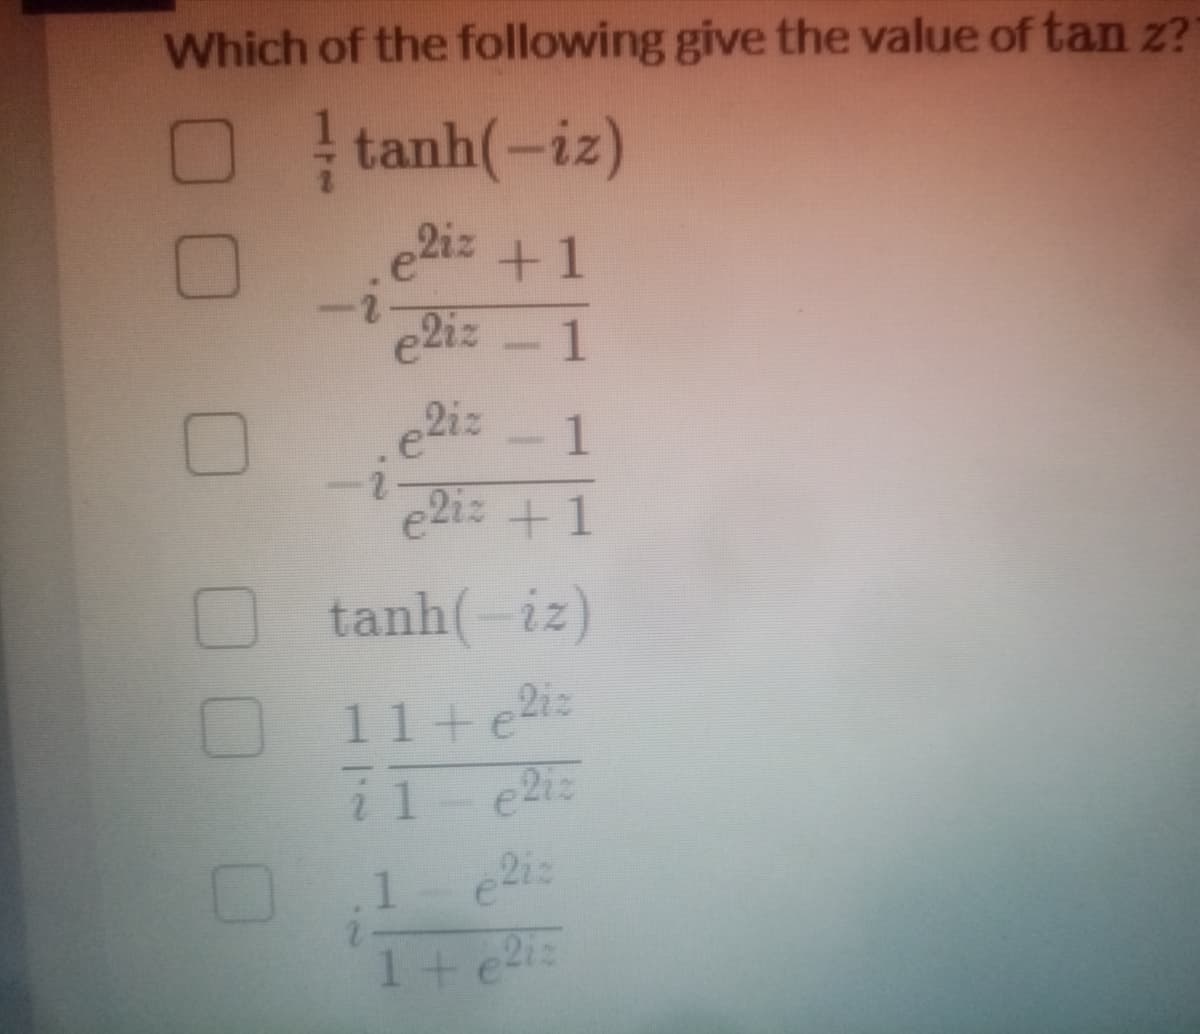 Which of the following give the value of tan z?
tanh(-iz)
e2iz
1
e2iz 1
e2iz +1
tanh(-iz)
11+ e2iz
i 1- e2iz
1
1+e2i
